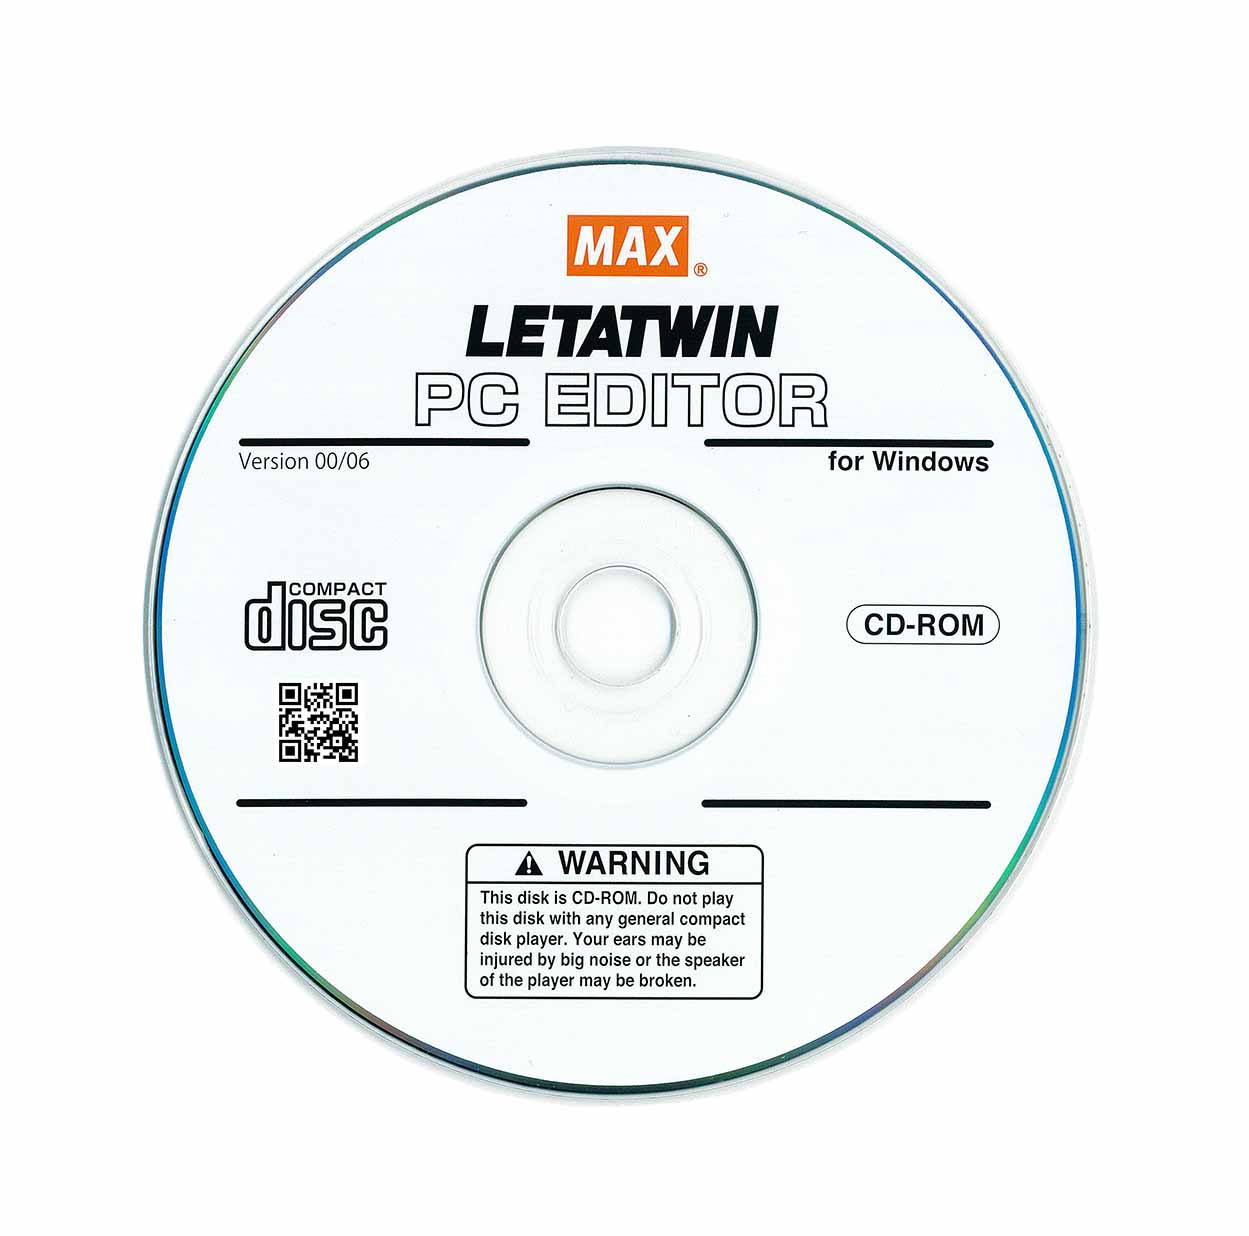 LETATWIN PC EDITOR LM-550A/PC, LM-390A/PC